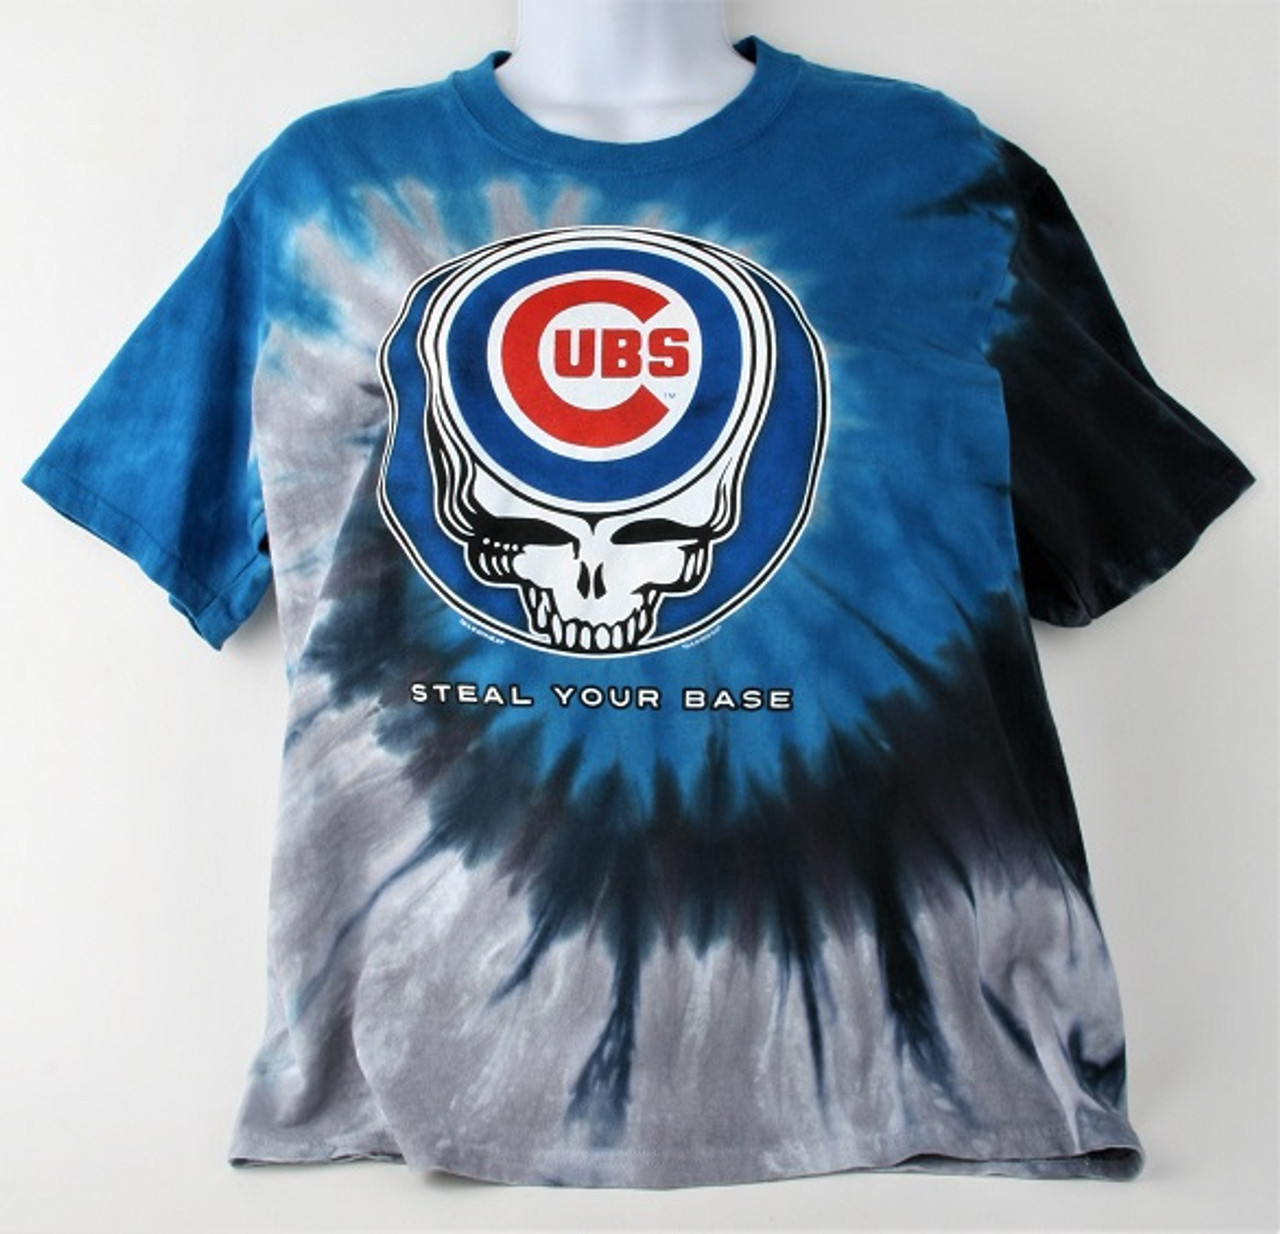 MLB Washington Nationals GD Steal Your Base Tie-Dye T-Shirt Tee